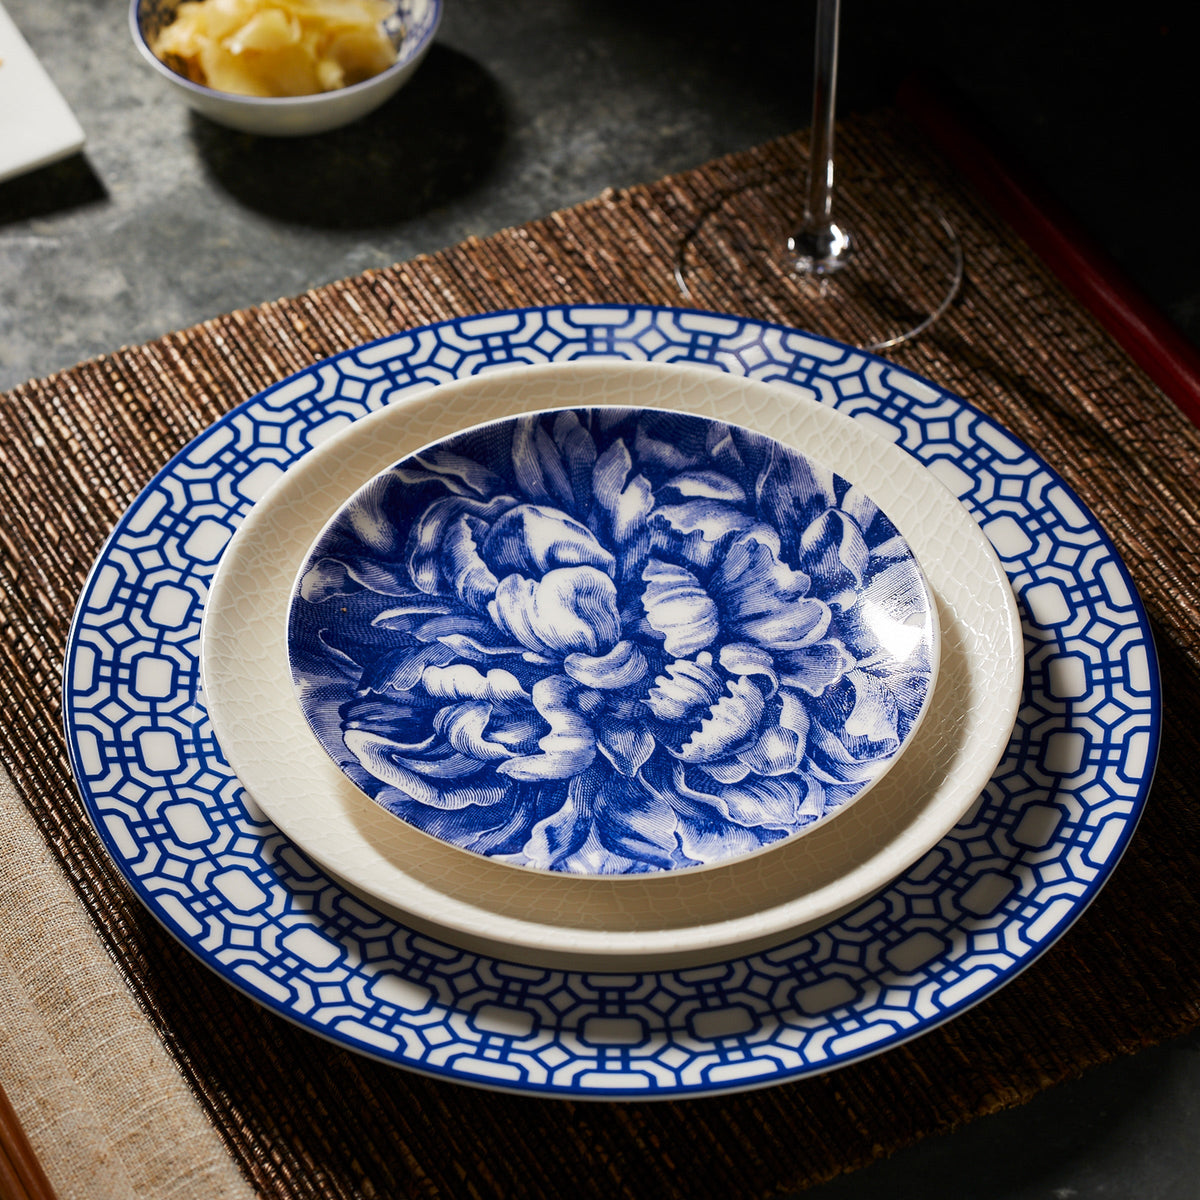 A place setting with exquisite heirloom-quality blue-and-white dinnerware, featuring a floral-patterned Peony Small Plate by Caskata Artisanal Home nested on a beige plate and a blue geometric-patterned charger plate, with a bowl of pineapple in the background.